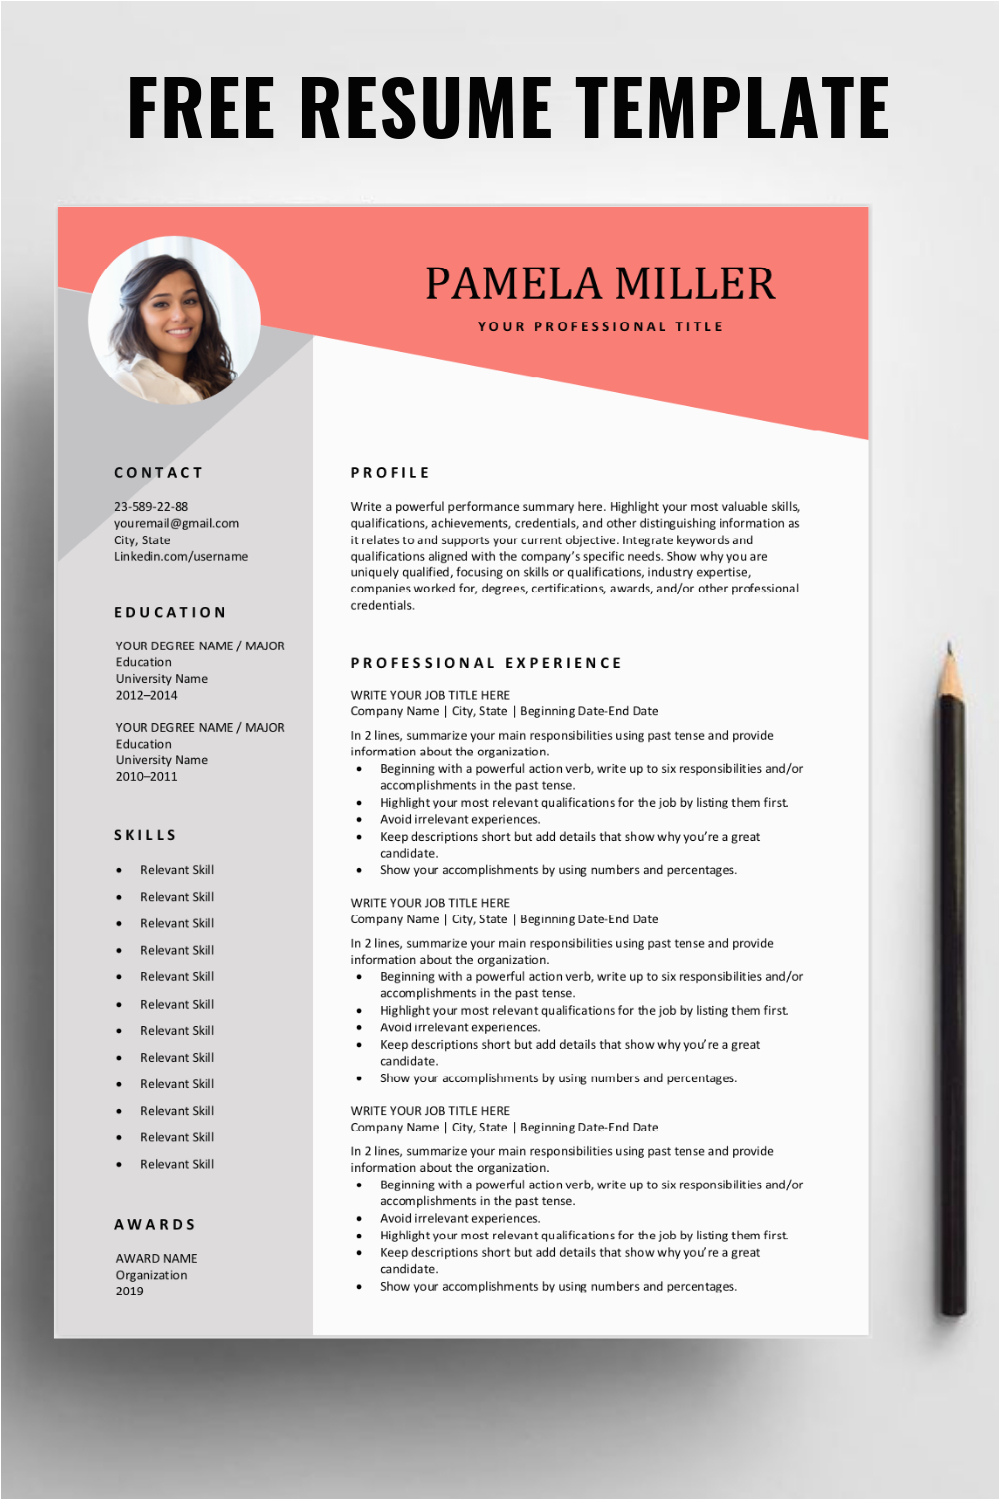 Simple Resume Template with Picture Free Download Free Resume Template